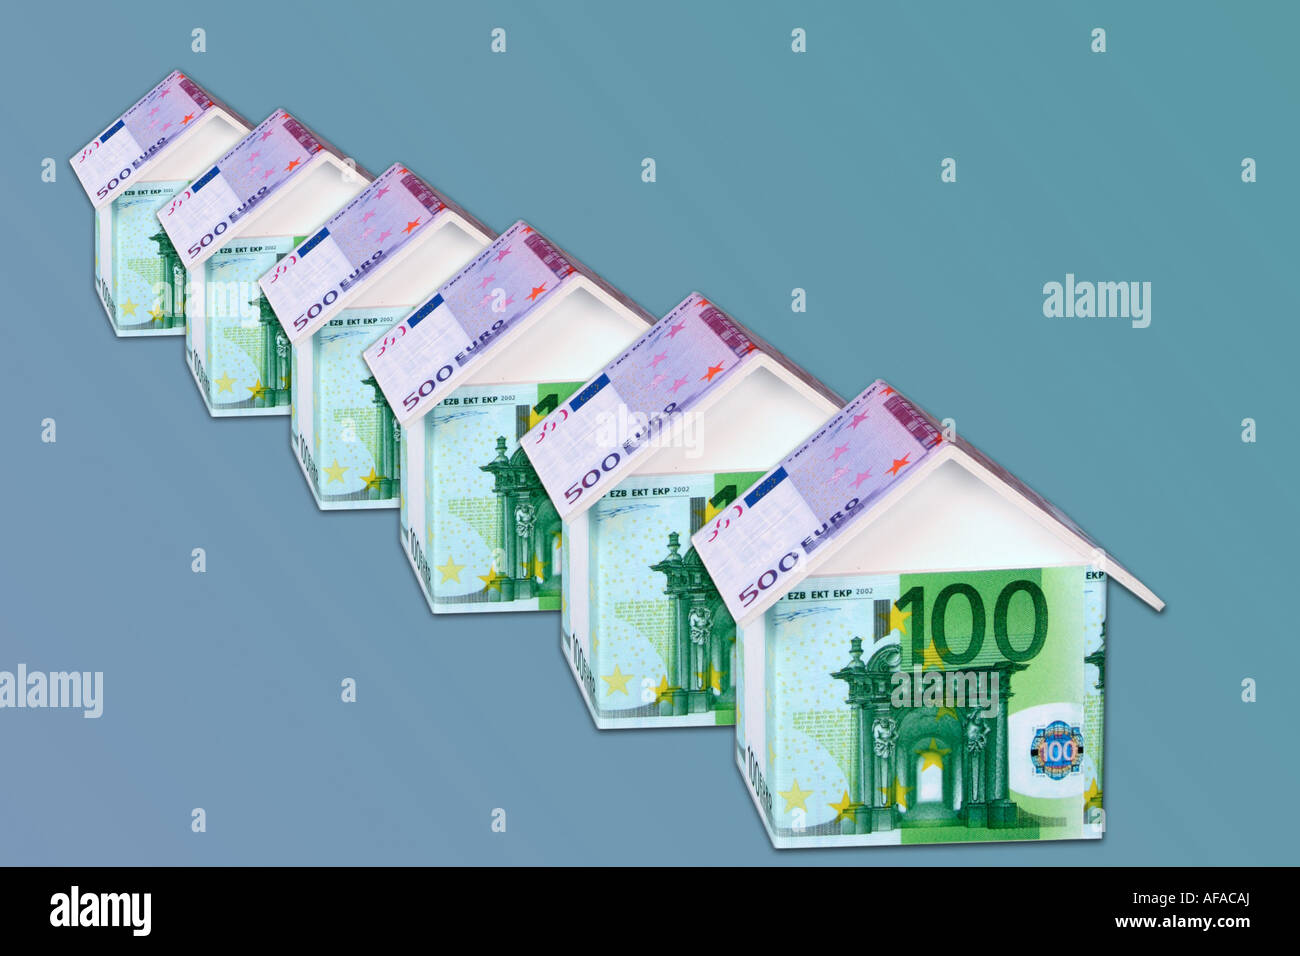 houses of banknotes Stock Photo